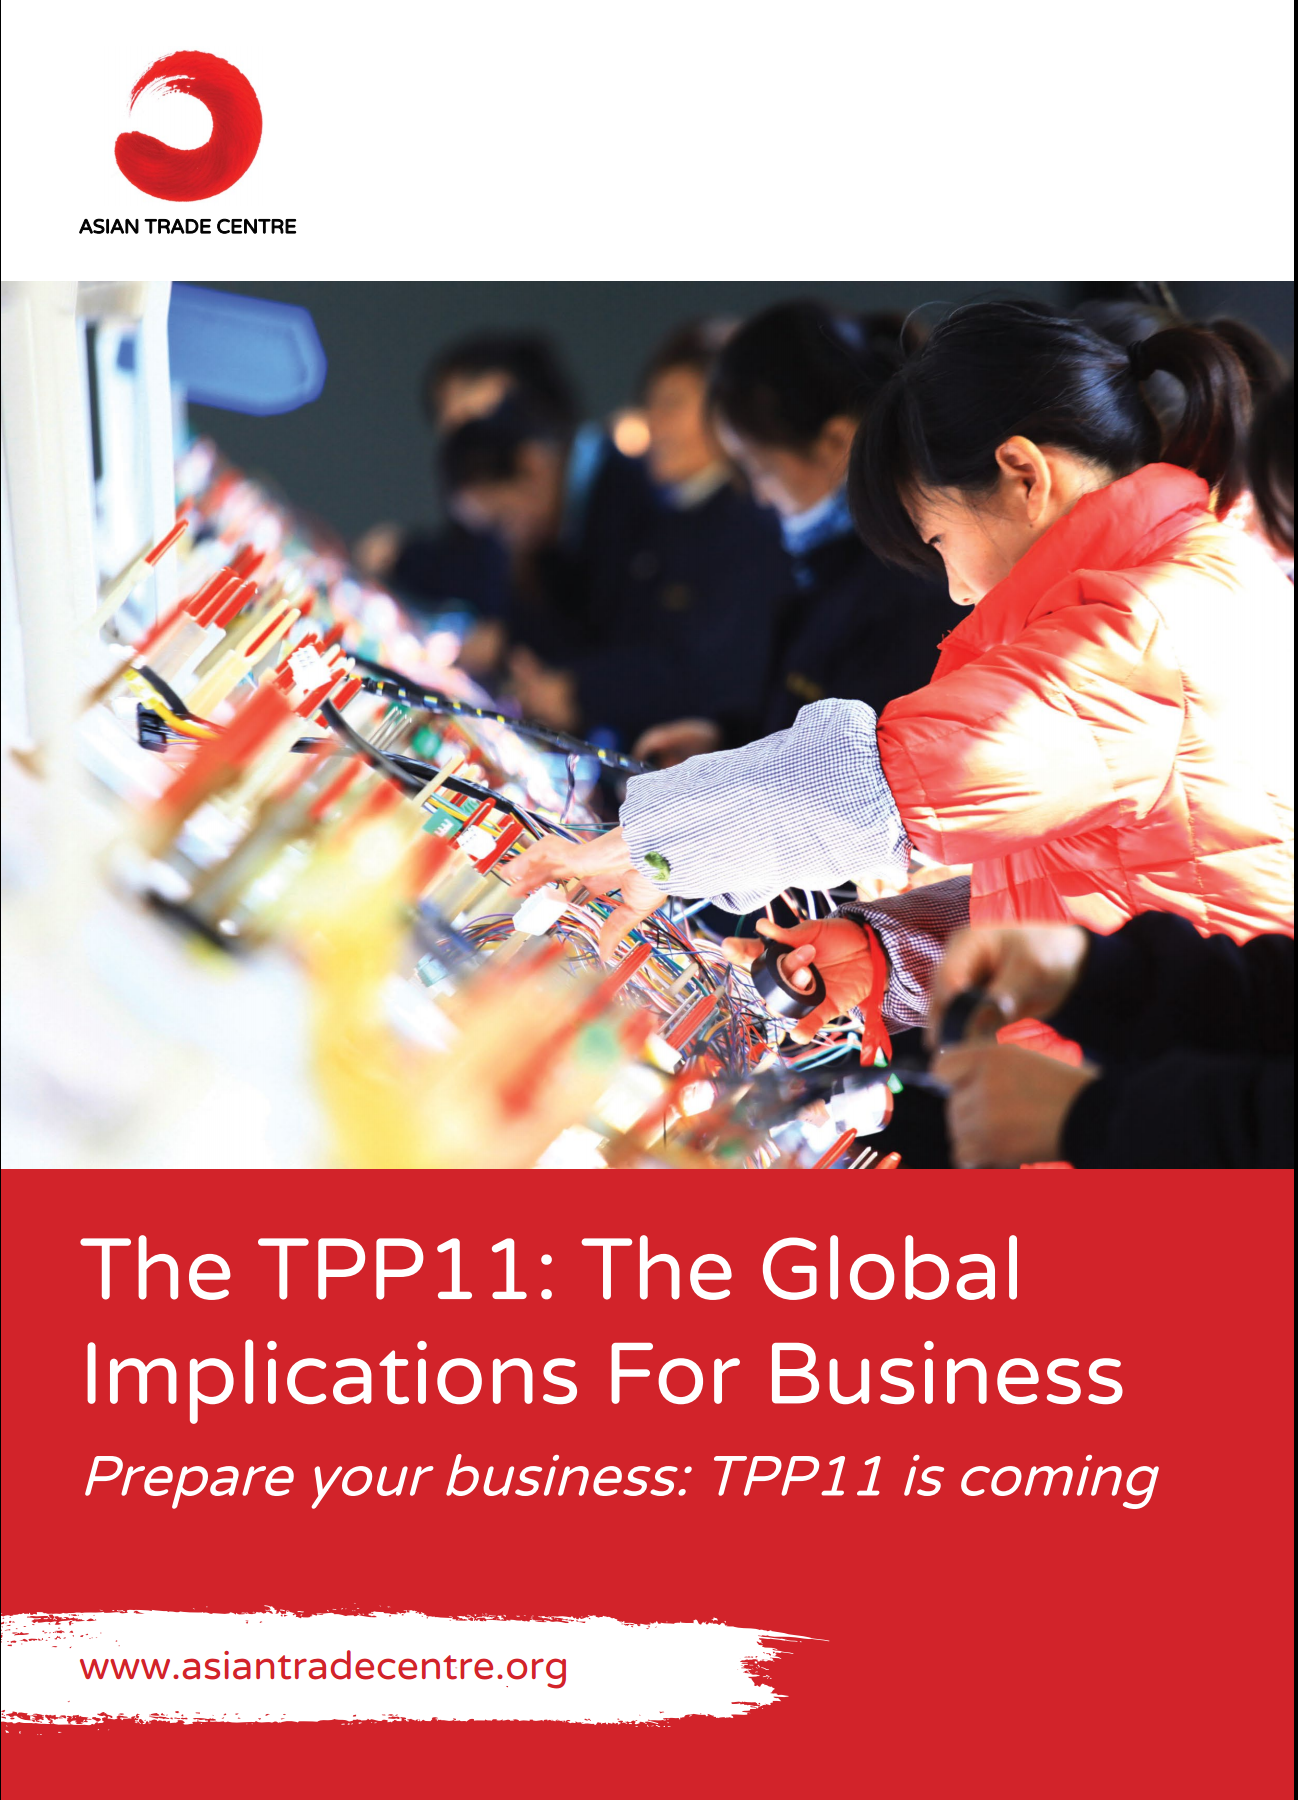 TPP11 benefits - Cover photo.PNG